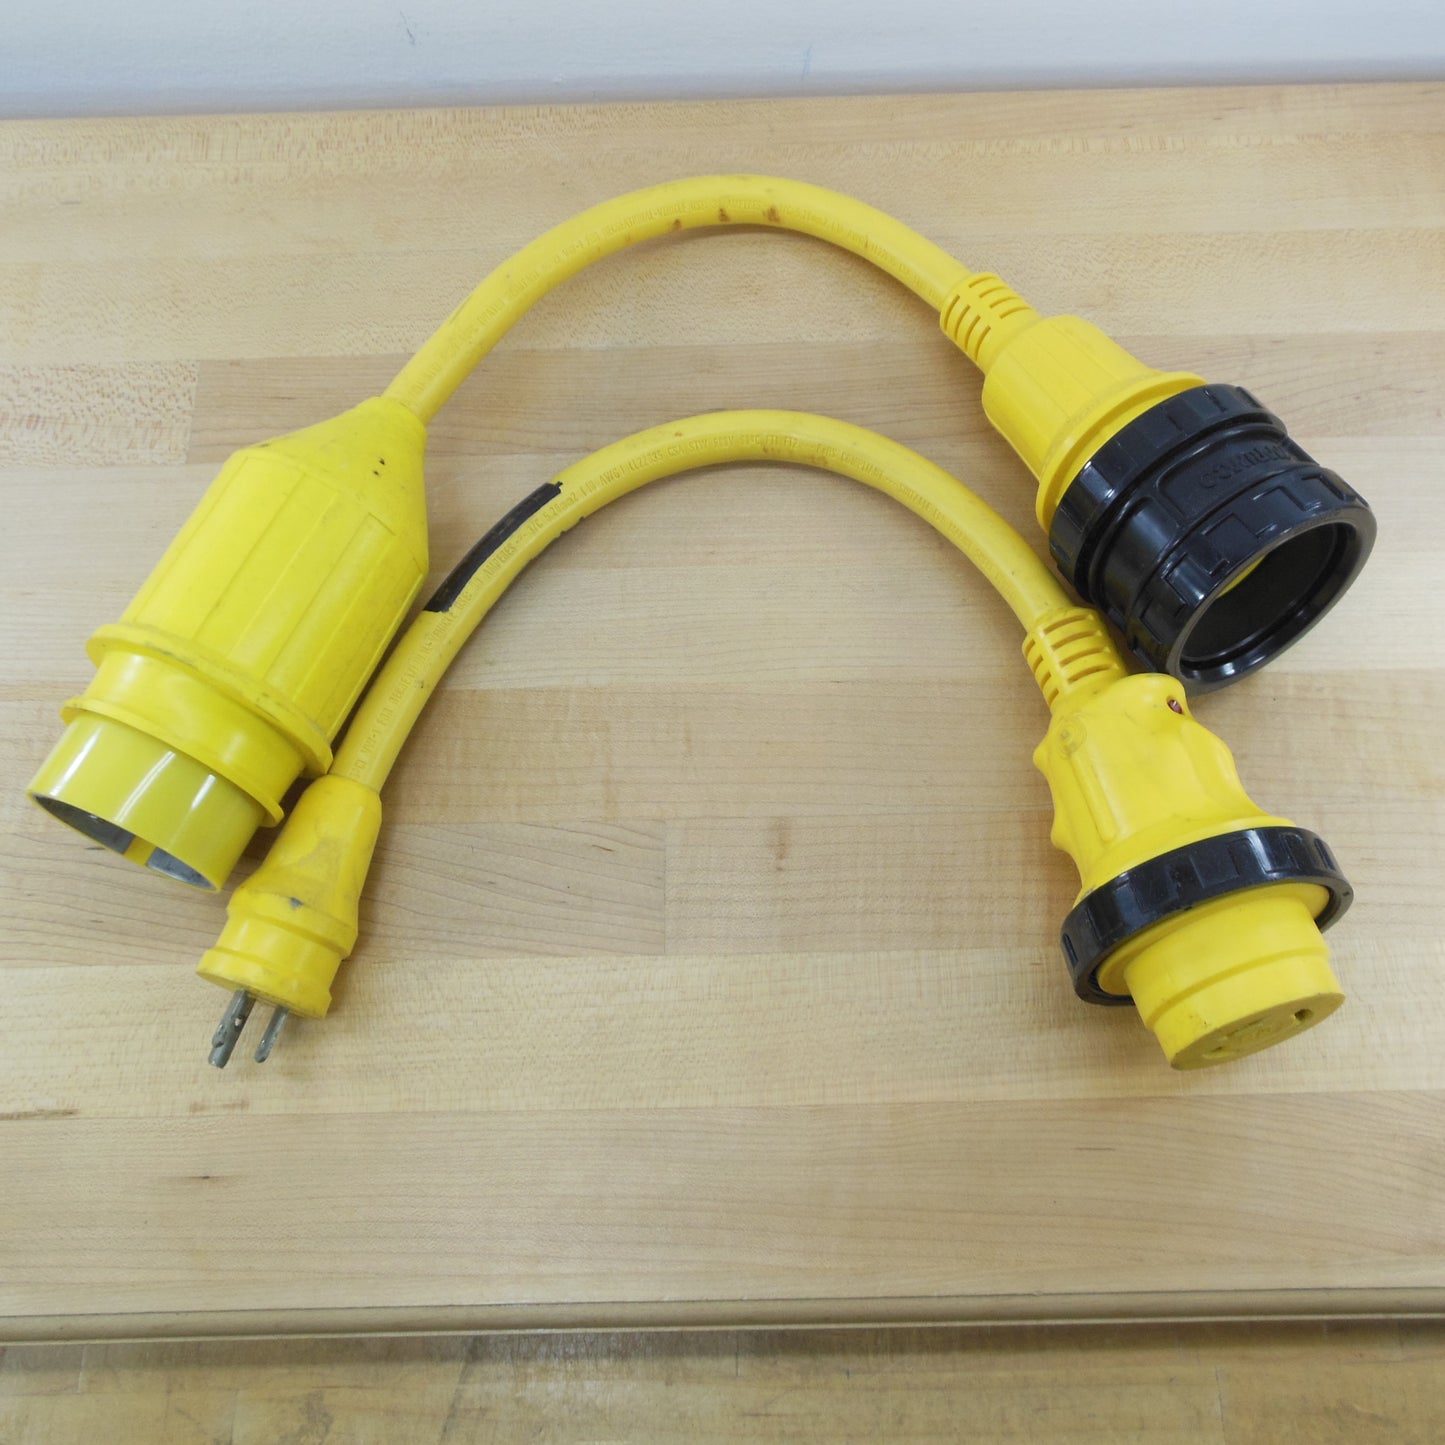 Marinco Shore Power Cord Adaptors 50 Amp to 30 Amp - 30 Amp to 15 Amp used